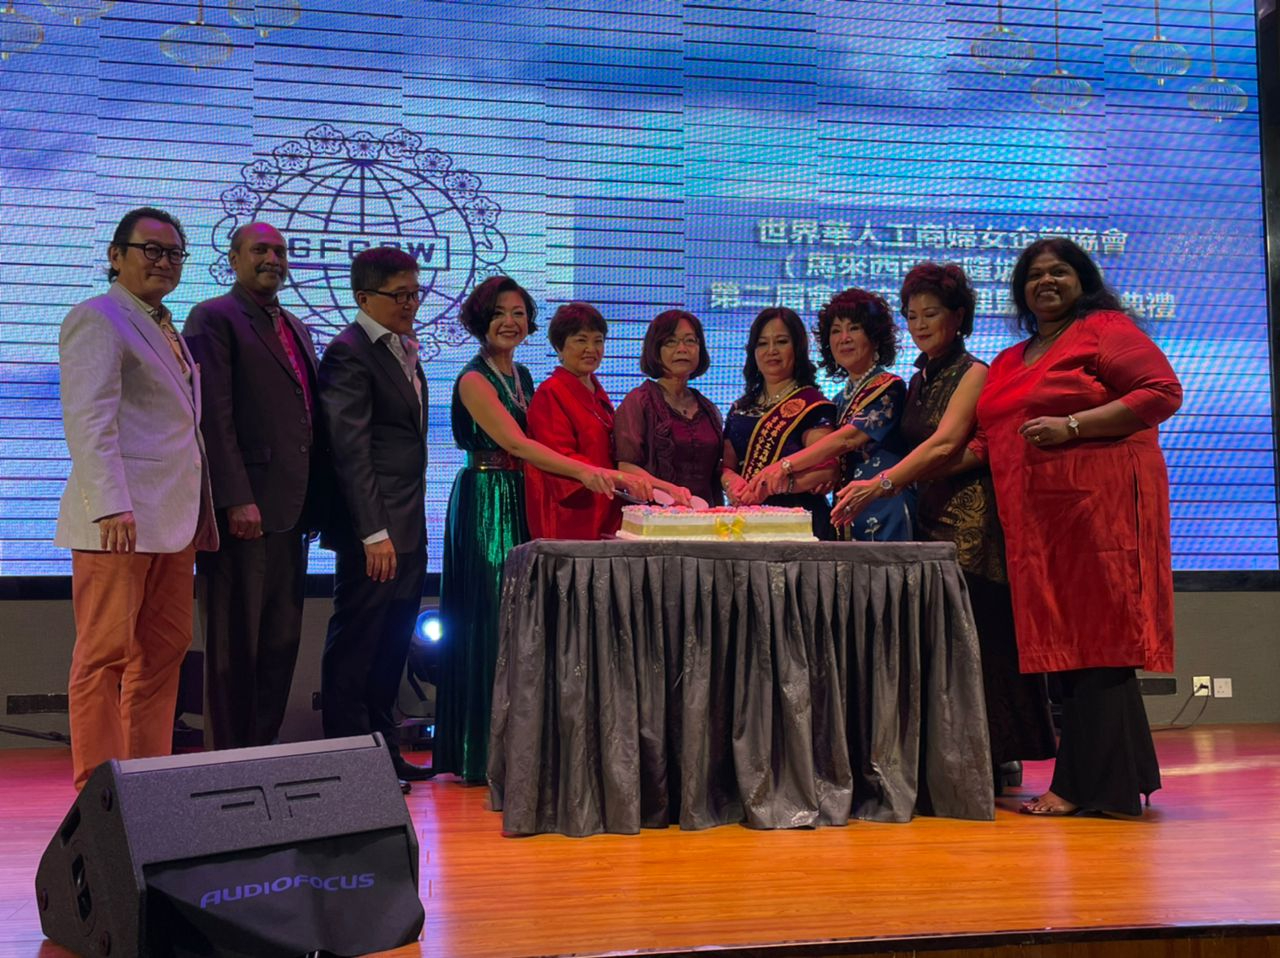 Representative Anne Hung (5th from right) participats in the cake cutting ceremony.